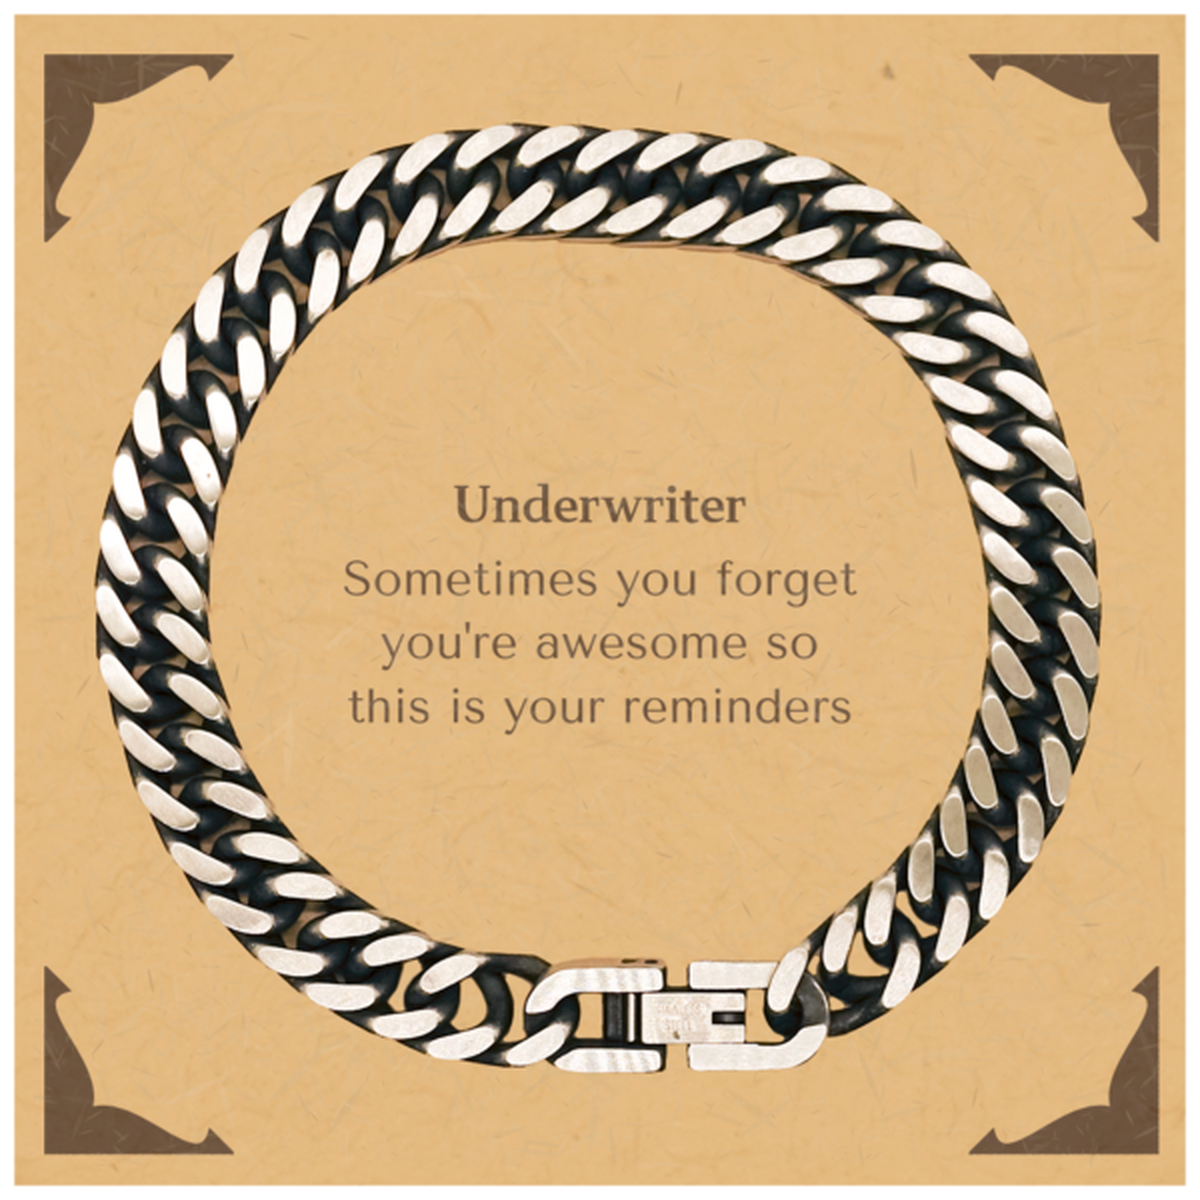 Sentimental Underwriter Cuban Link Chain Bracelet, Underwriter Sometimes you forget you're awesome so this is your reminders, Graduation Christmas Birthday Gifts for Underwriter, Men, Women, Coworkers